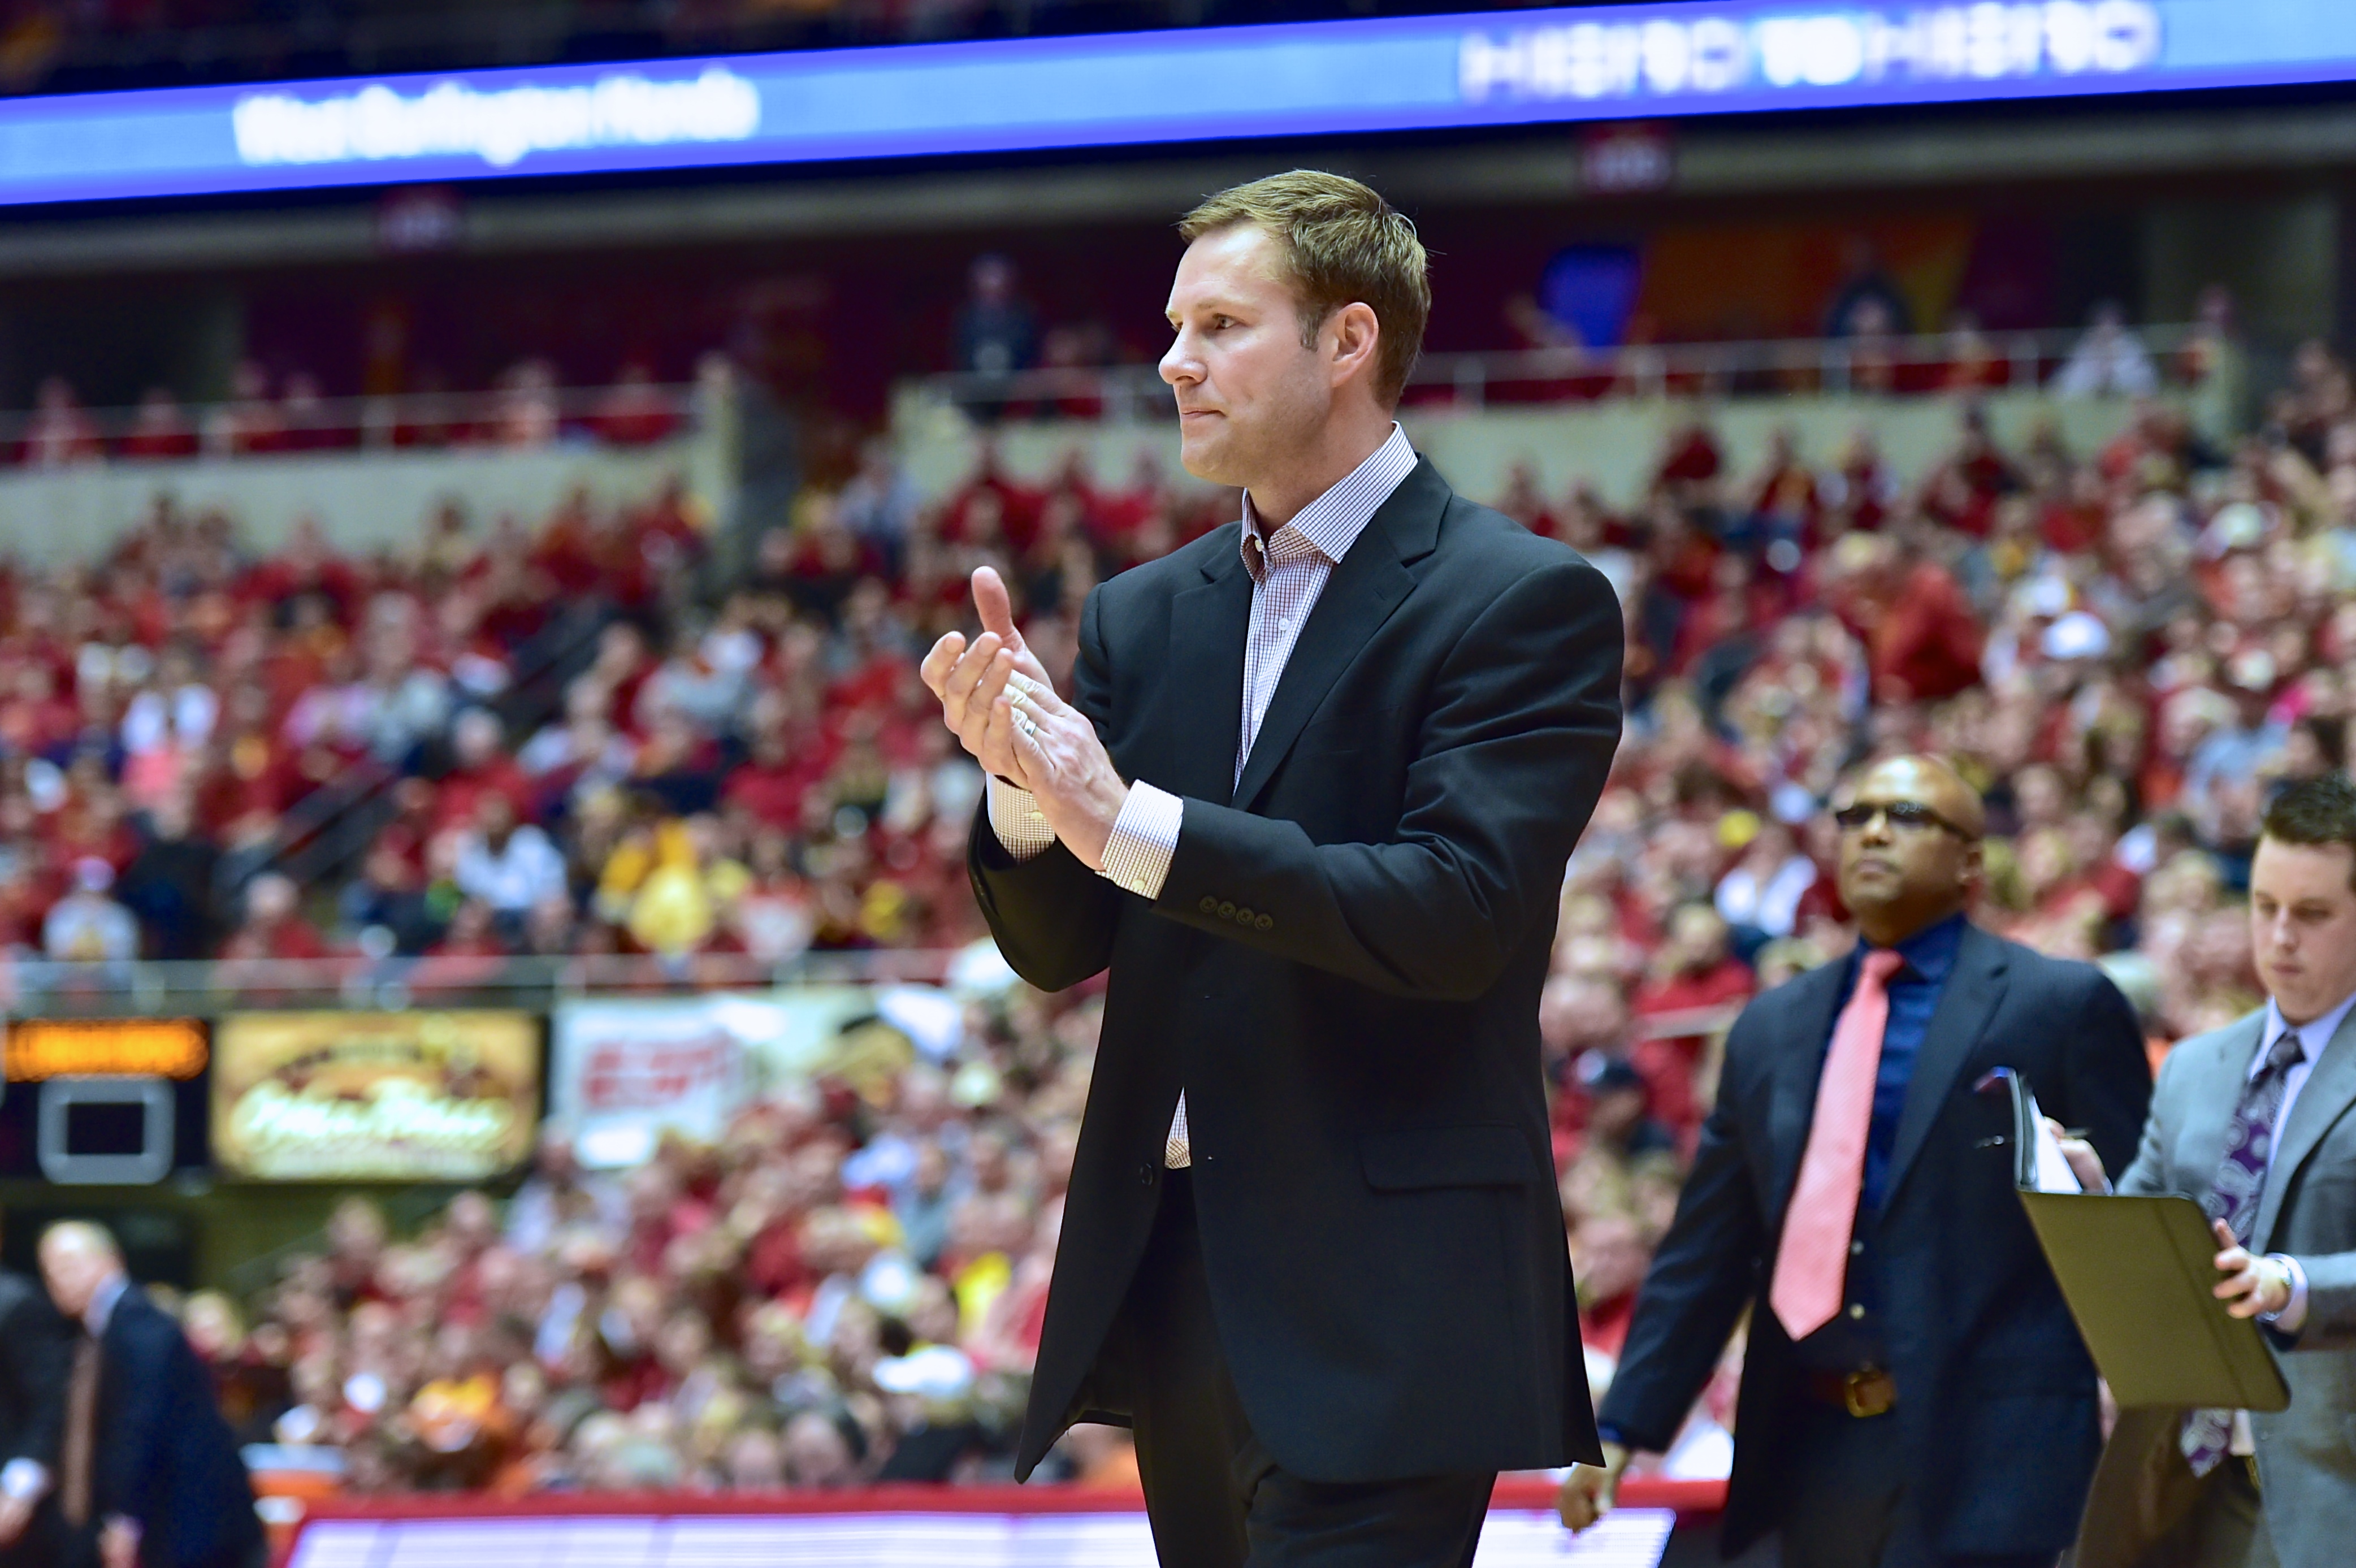 Hoiberg stands on the sidelines of Hilton Coliseum. Assistant coaches and Iowa State fans are in the background.